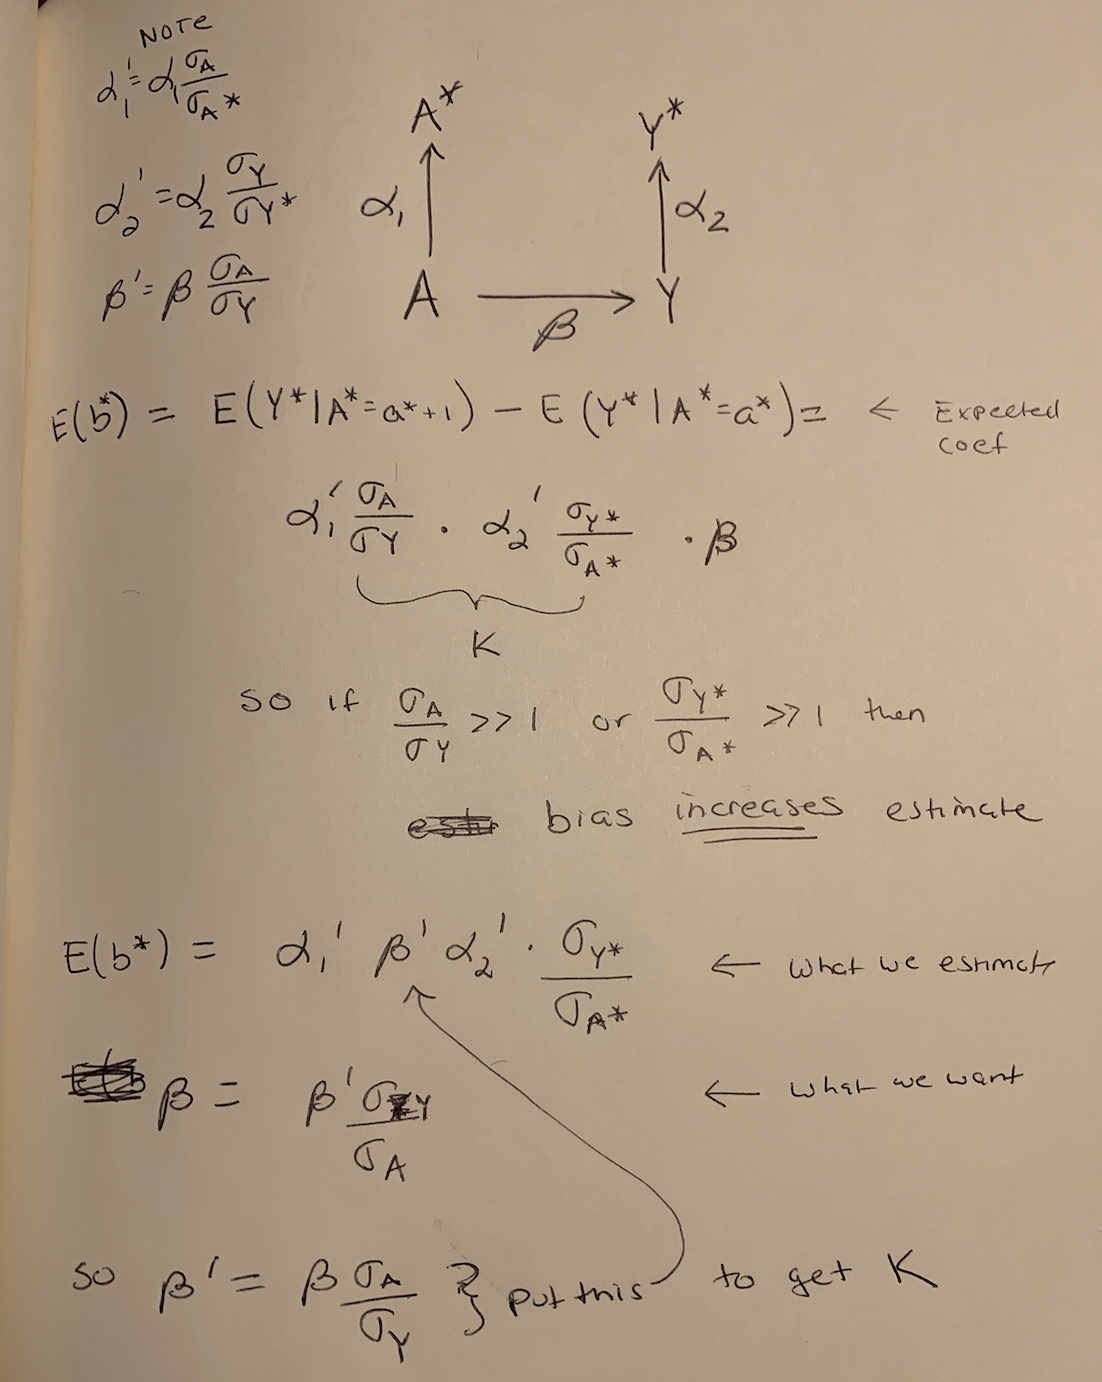 Old fashion doodle deriving the bias of the estimate of \beta when proxies of A and Y are measured. The bias is k.